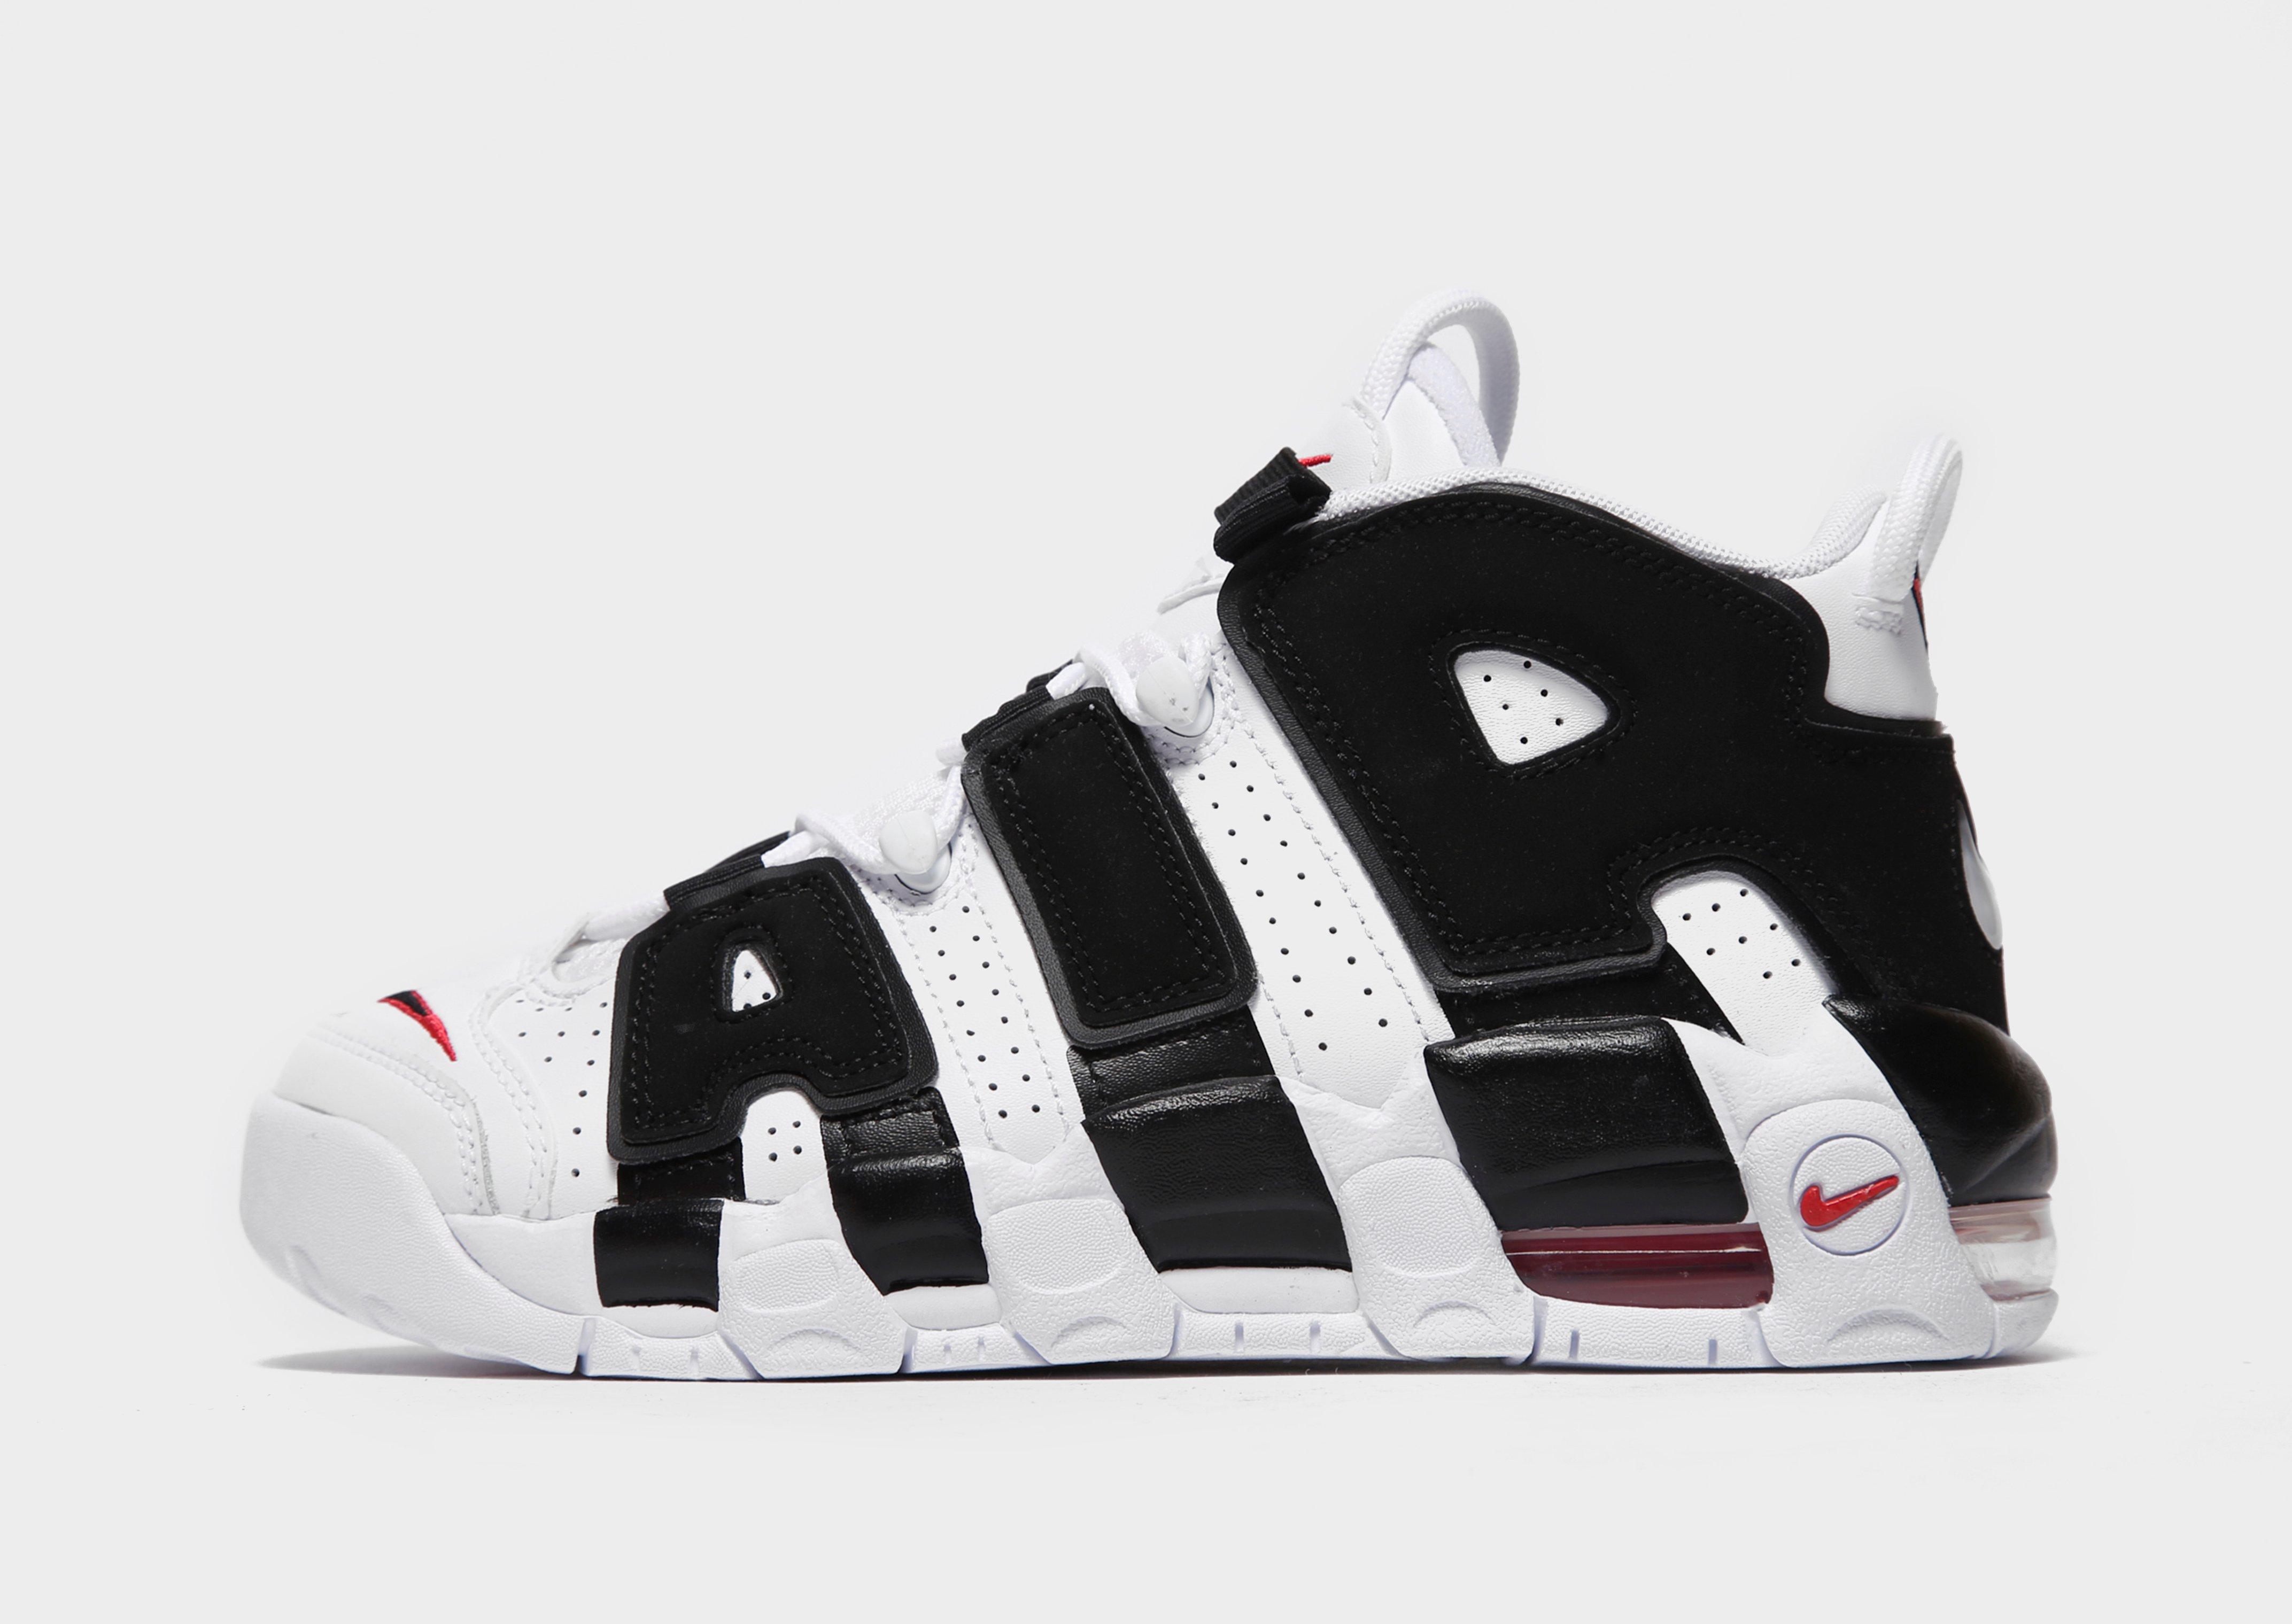 jd nike air more uptempo